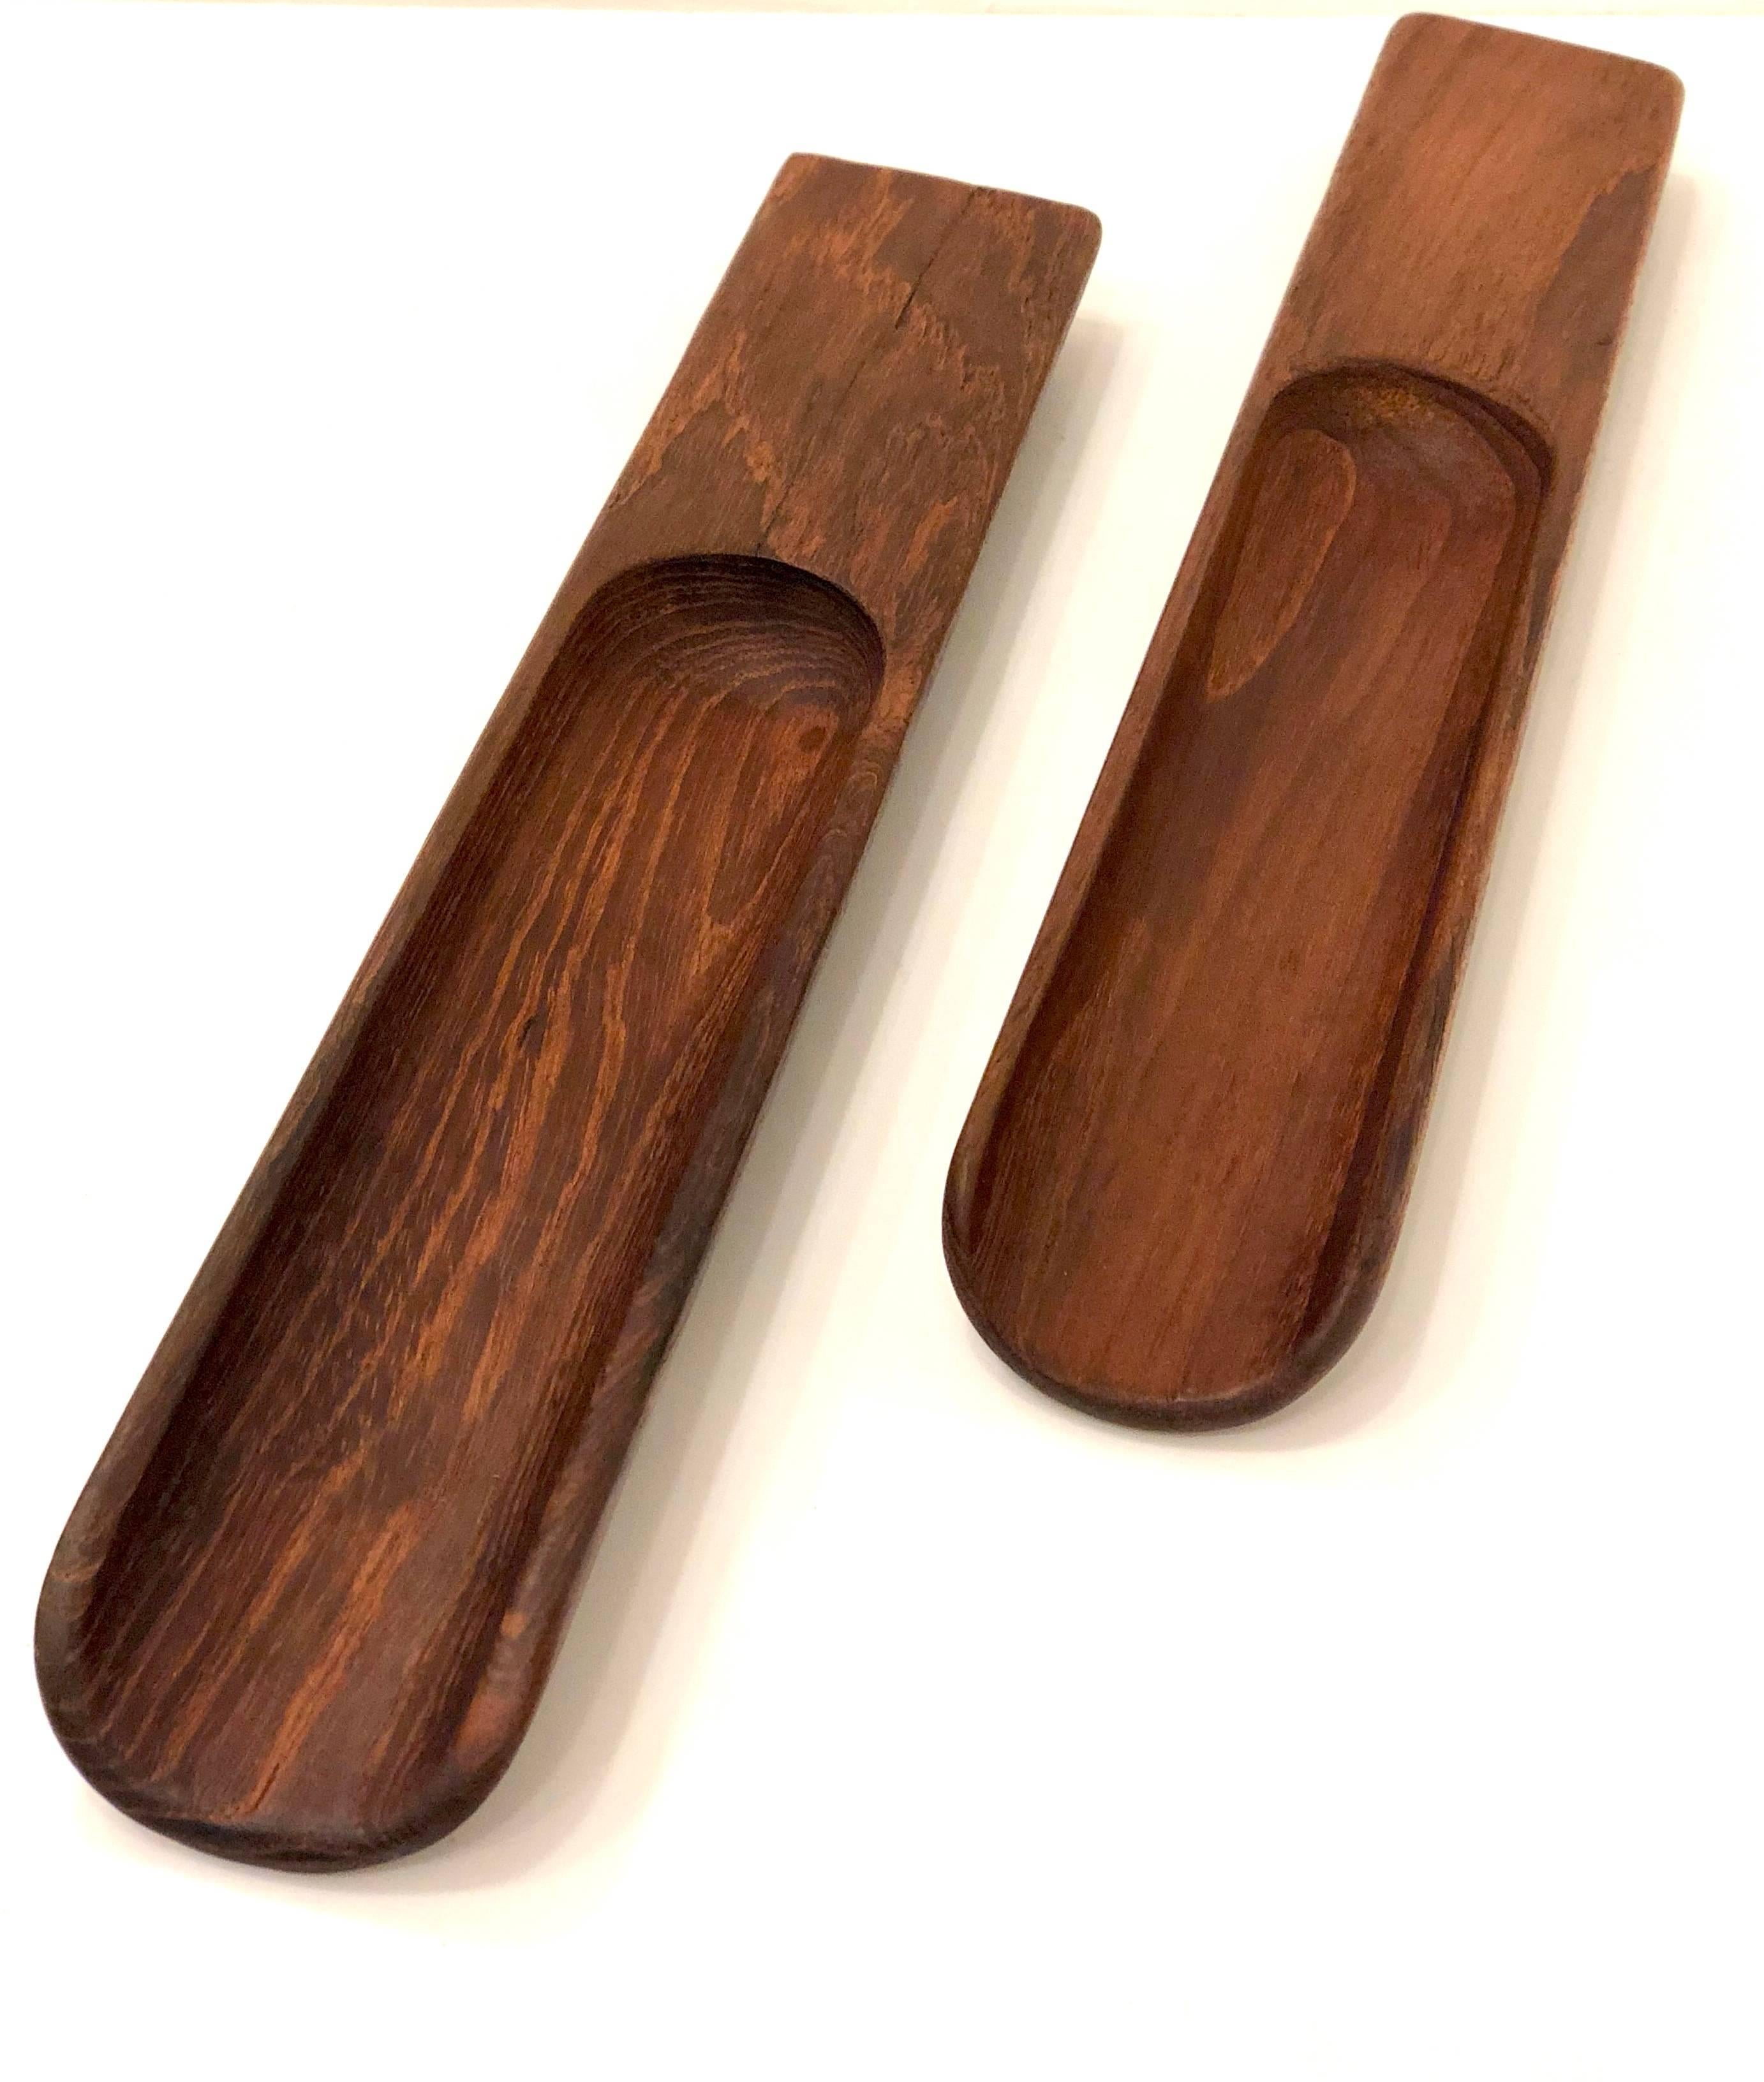 Great design on these set of solid teak salad servers designed by Quistgaard for Dansk, great condition stamped.